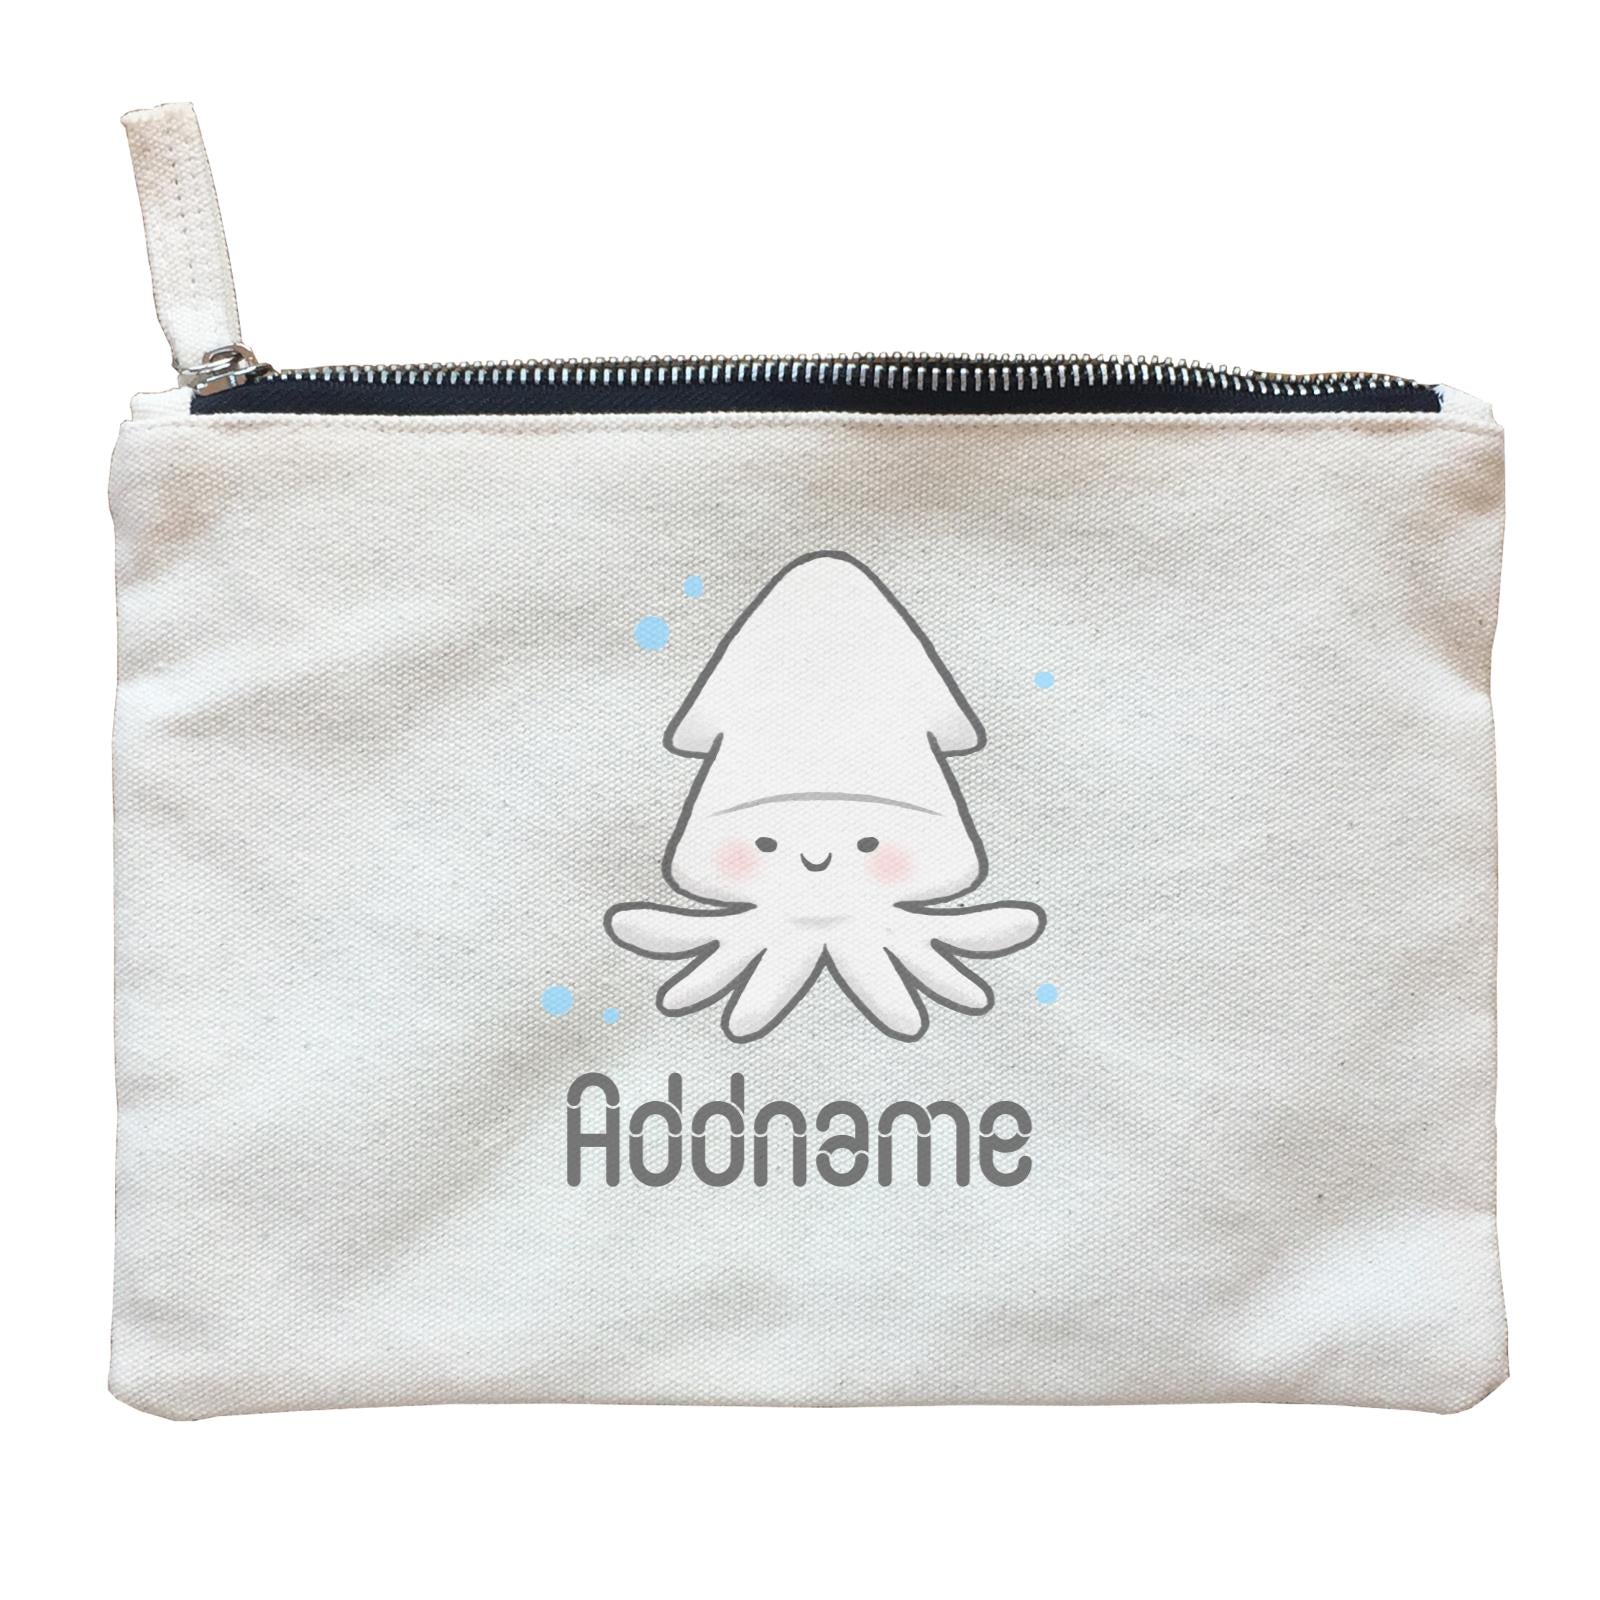 Cute Hand Drawn Style Squid Addname Zipper Pouch